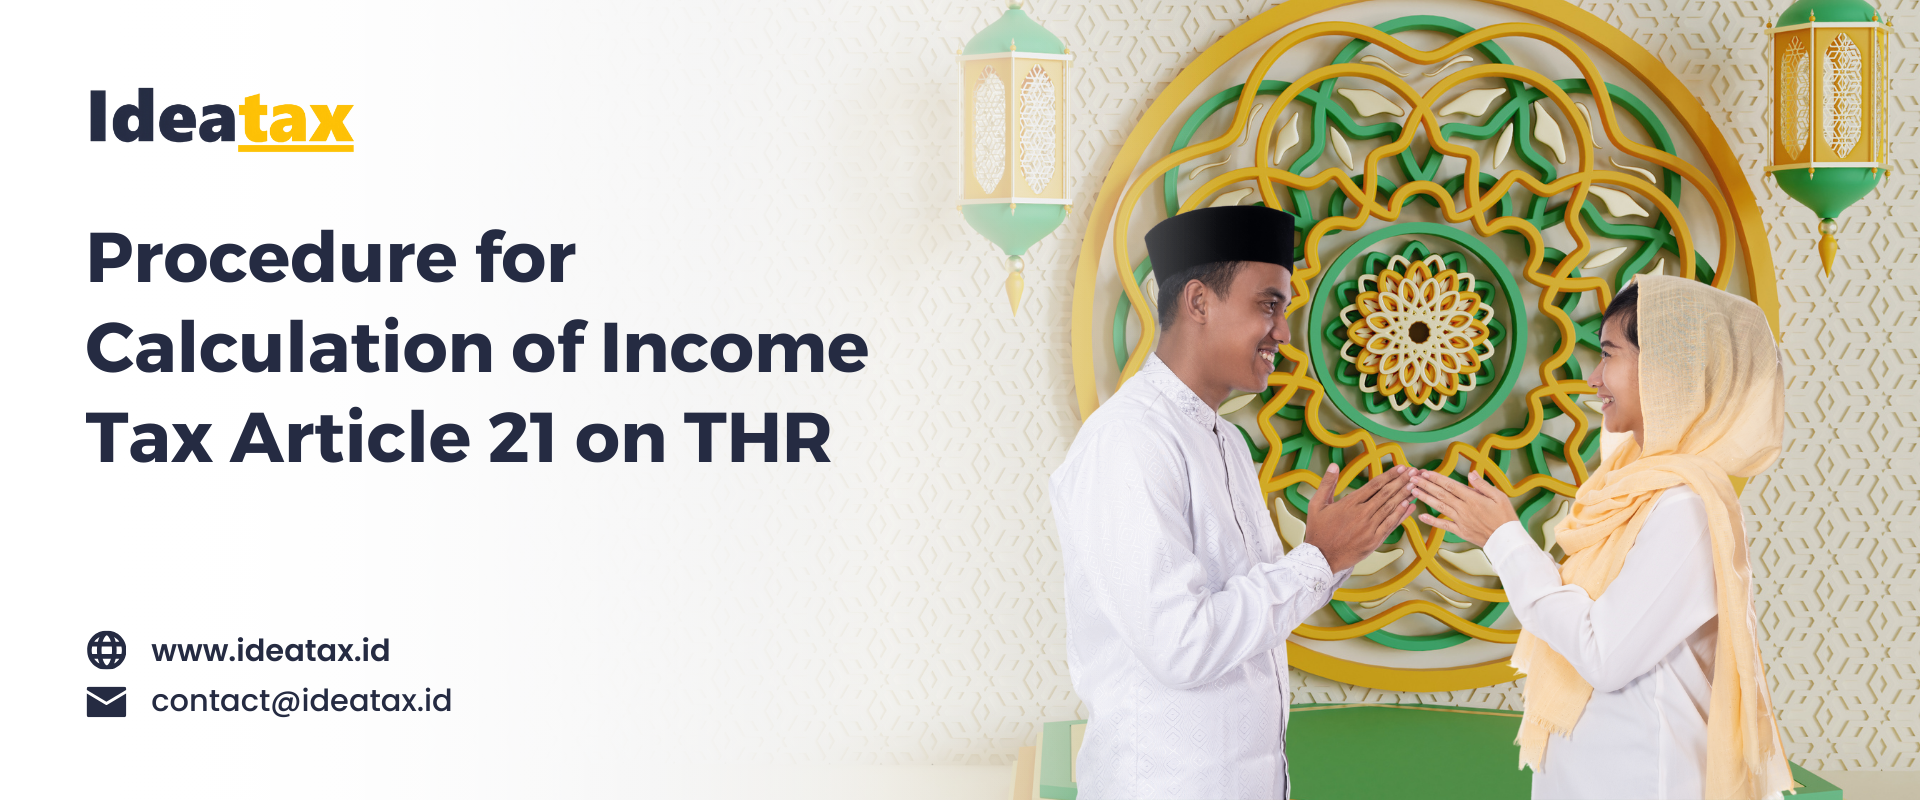 Procedure for Calculation of Income Tax Article 21 on THR